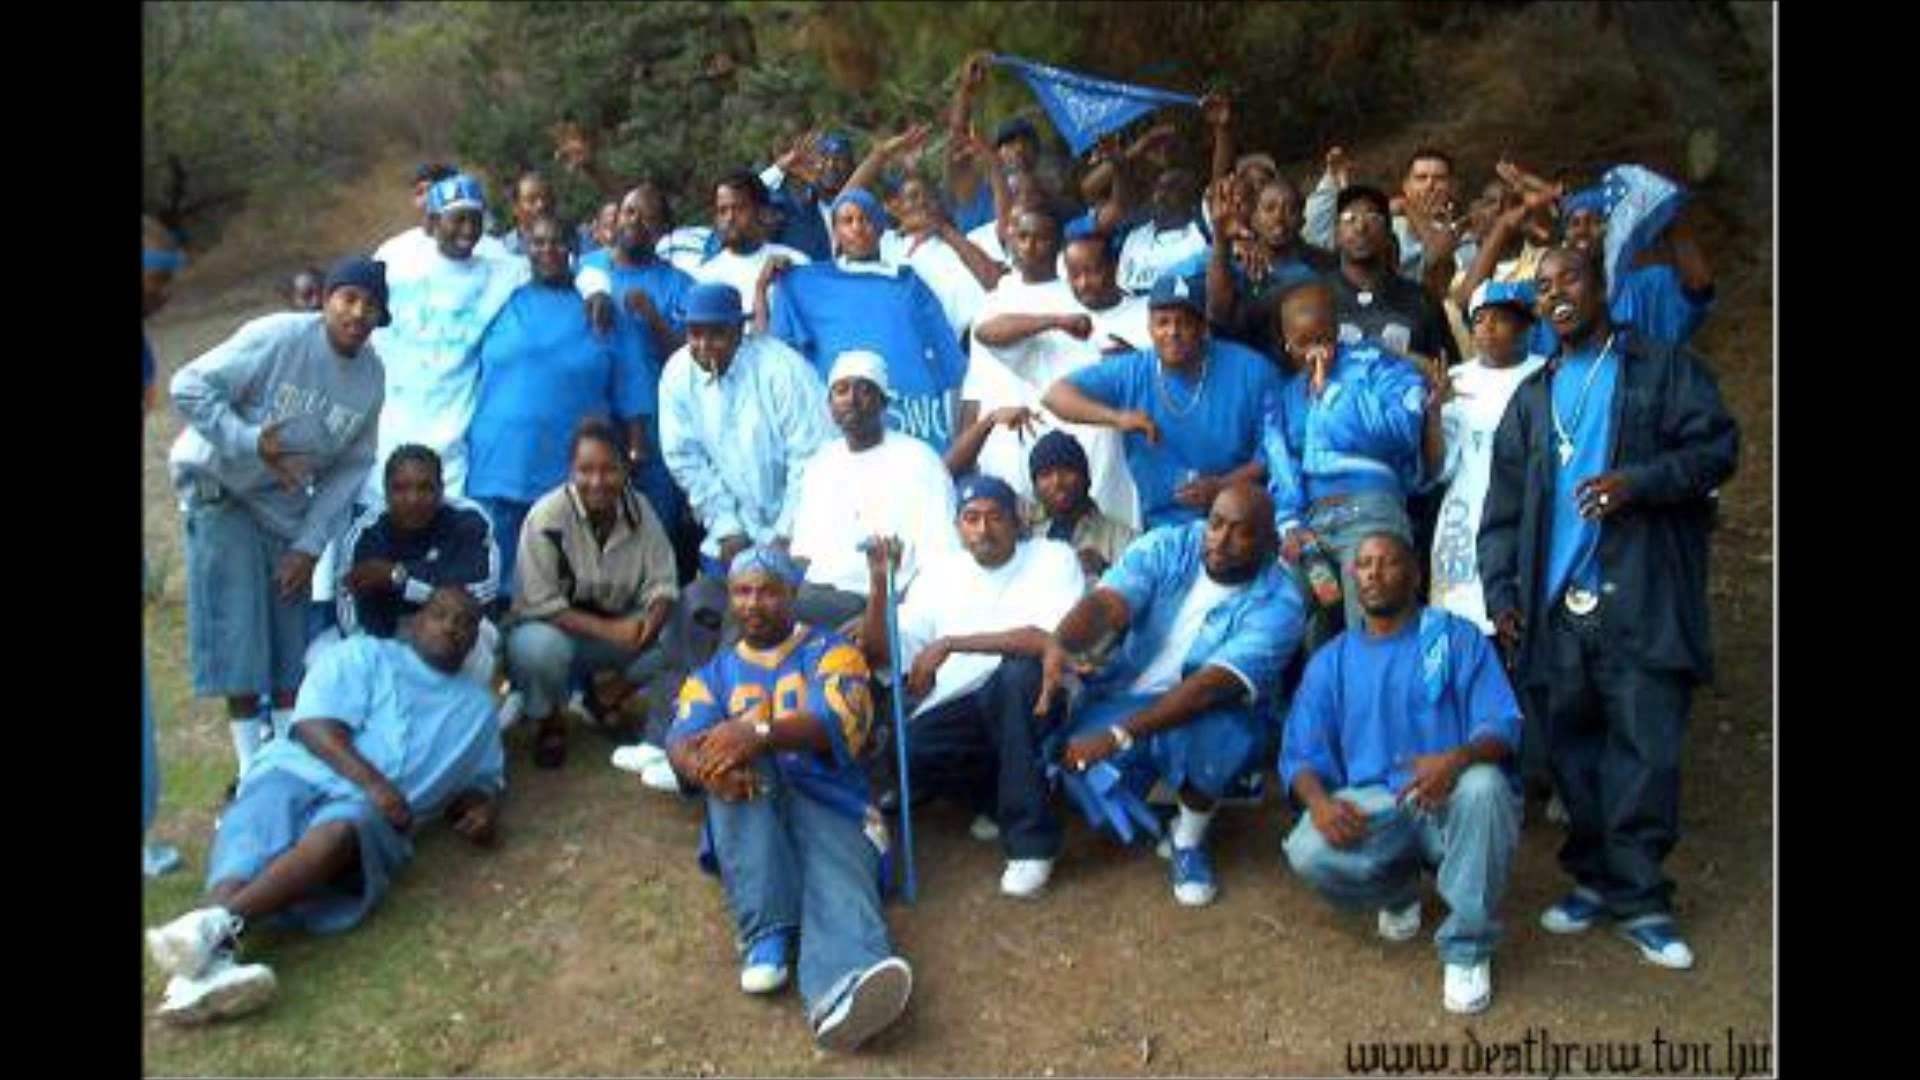 1920x1080 Conference Call : Crips Unite Nation Wide